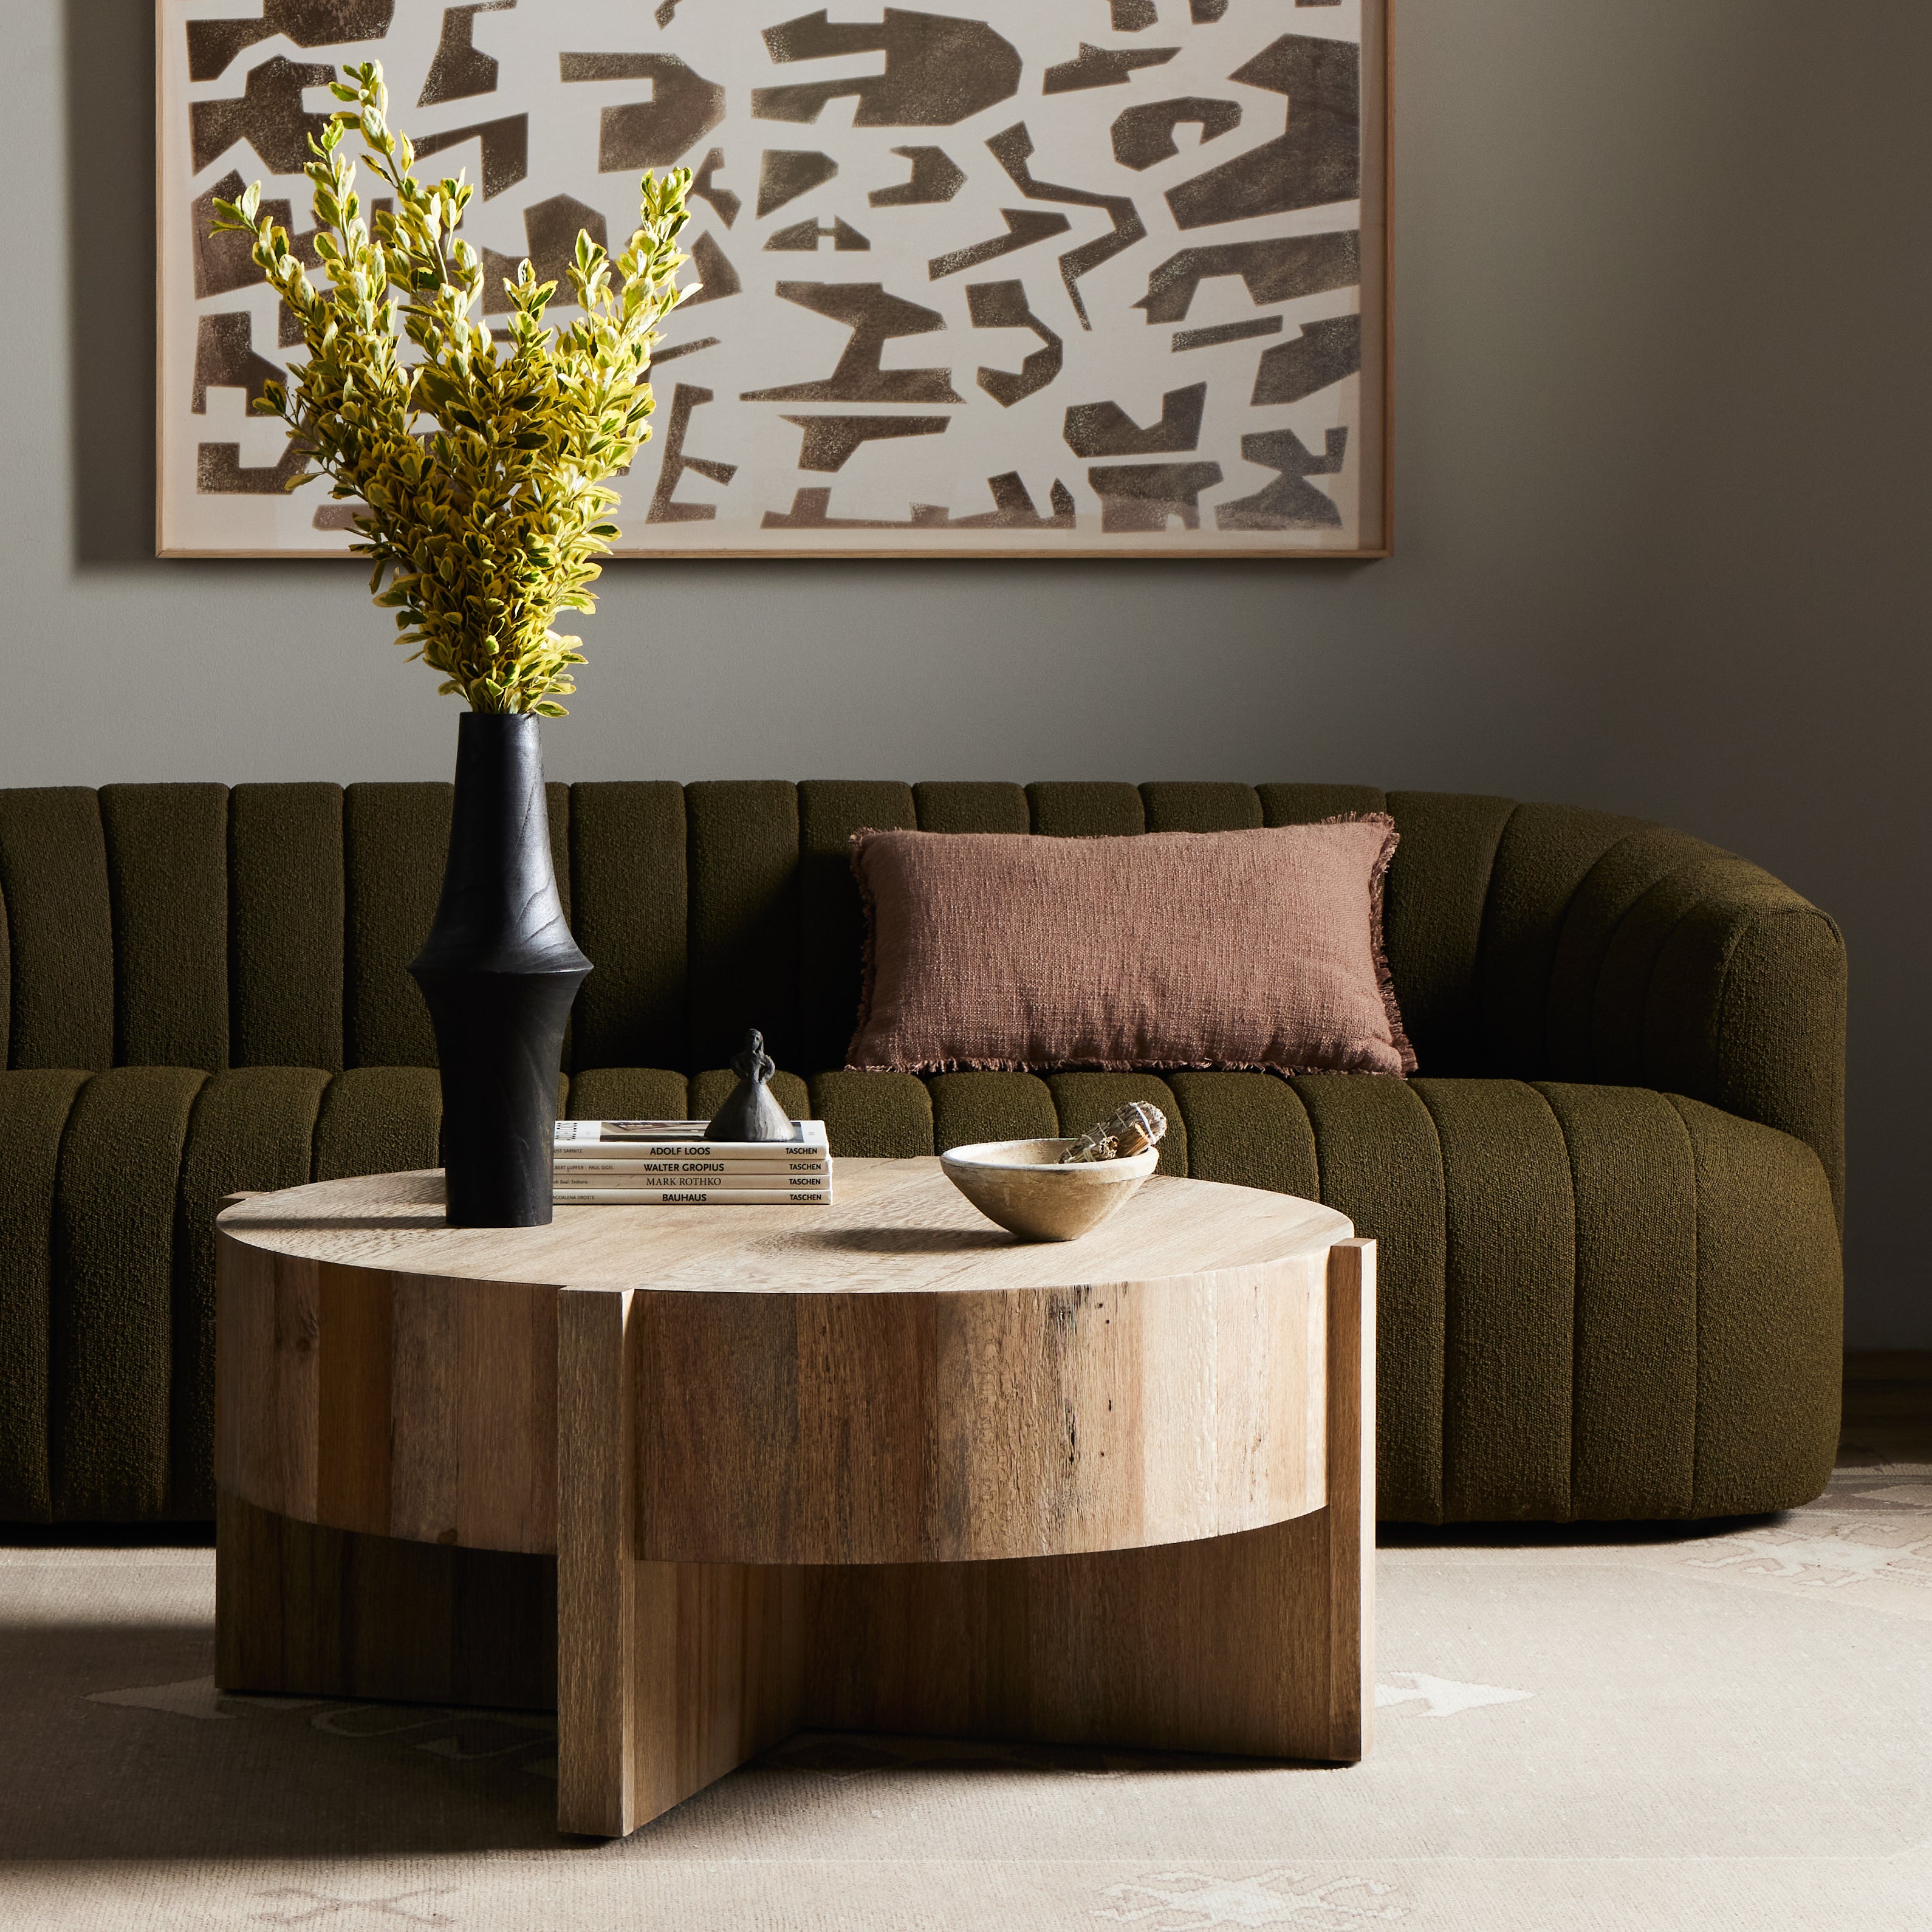 An organic-spirited statement piece. A drum-style coffee table of character-rich oak and veneers rests within a sculptural cradle base of matching rustic oak with beautiful highs and lows. Amethyst Home provides interior design, new construction, custom furniture, and area rugs in the Seattle metro area.